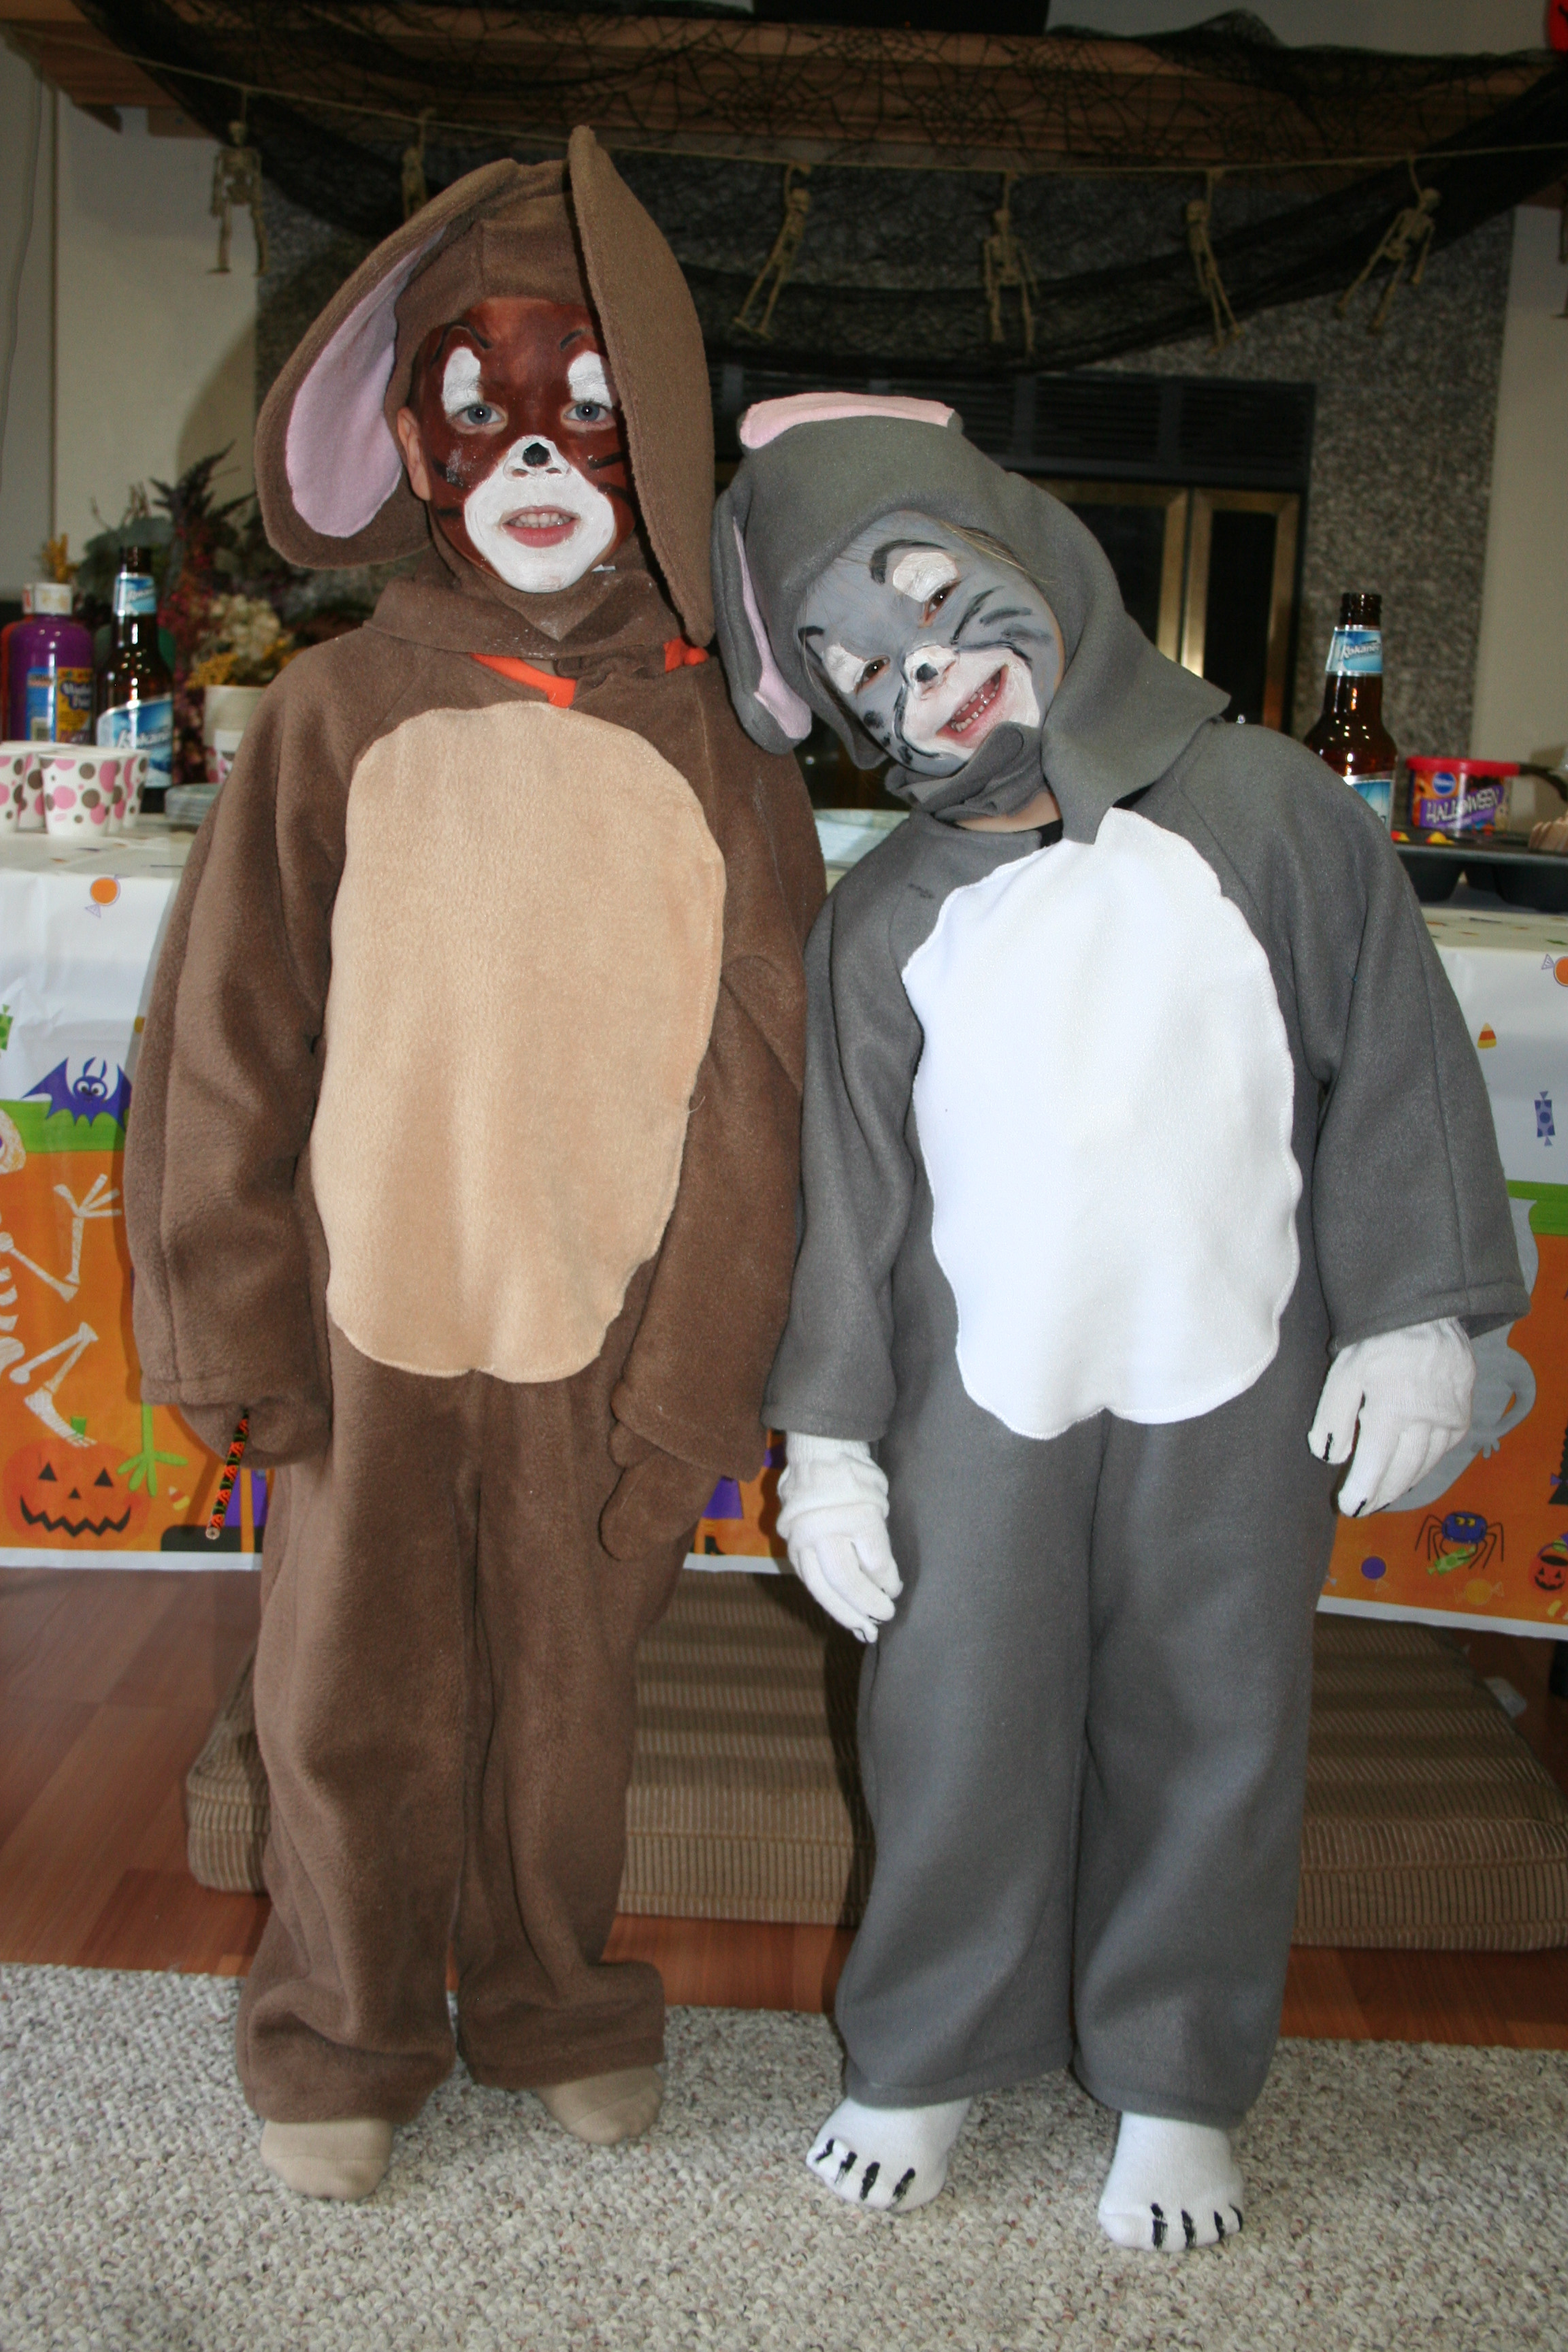 Best Tom And Jerry Costumes DIY from I Dream of a Halloween Theme - Profoun...